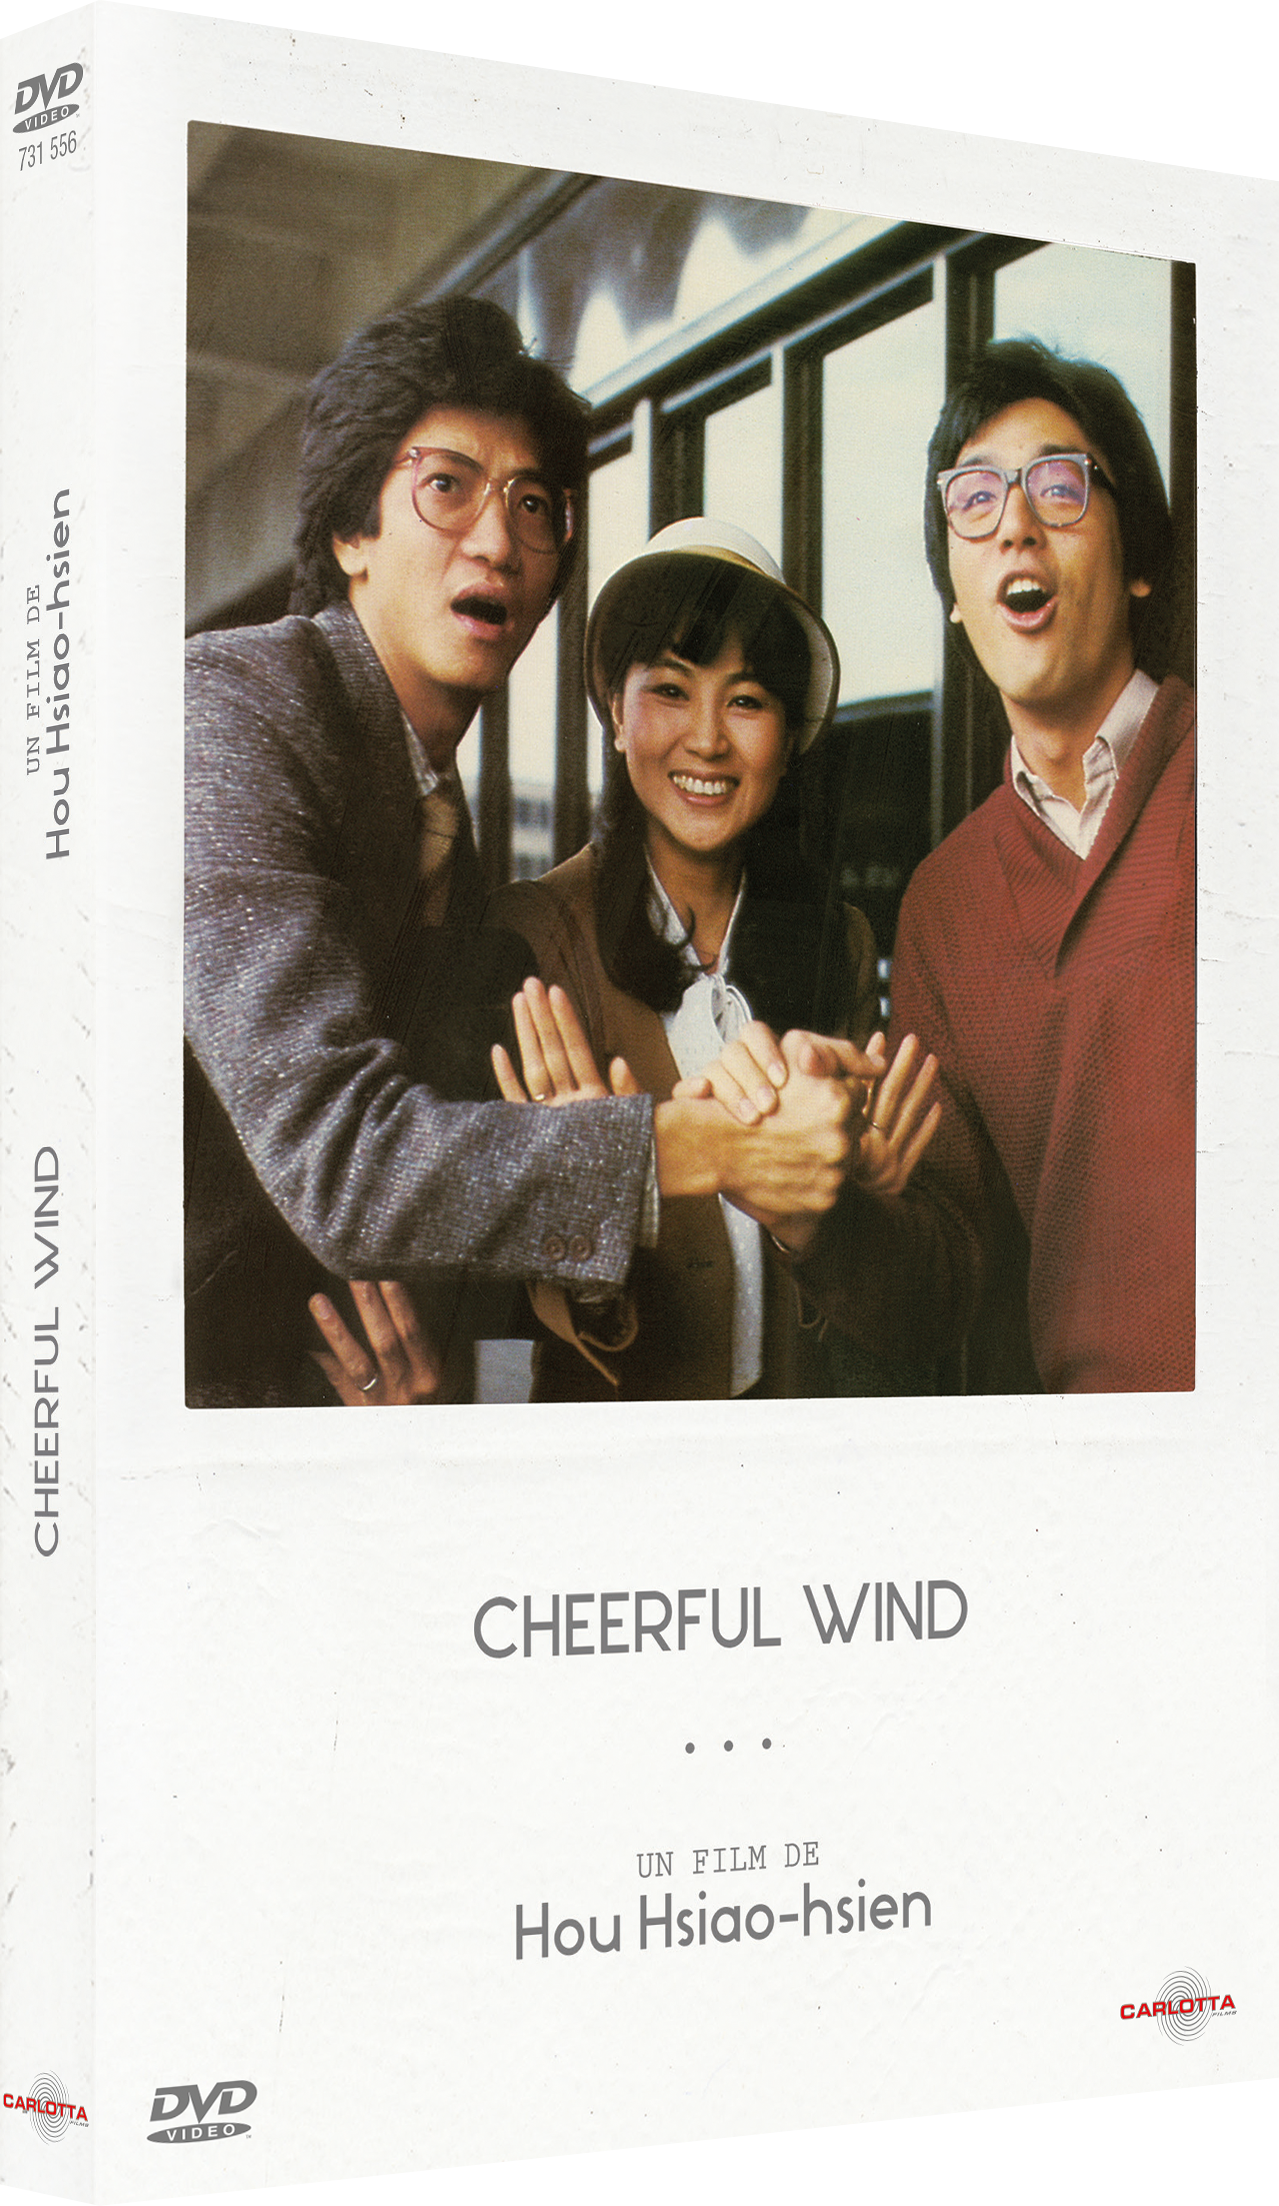 Cheerful Wind by Hou Hsiao-hsien